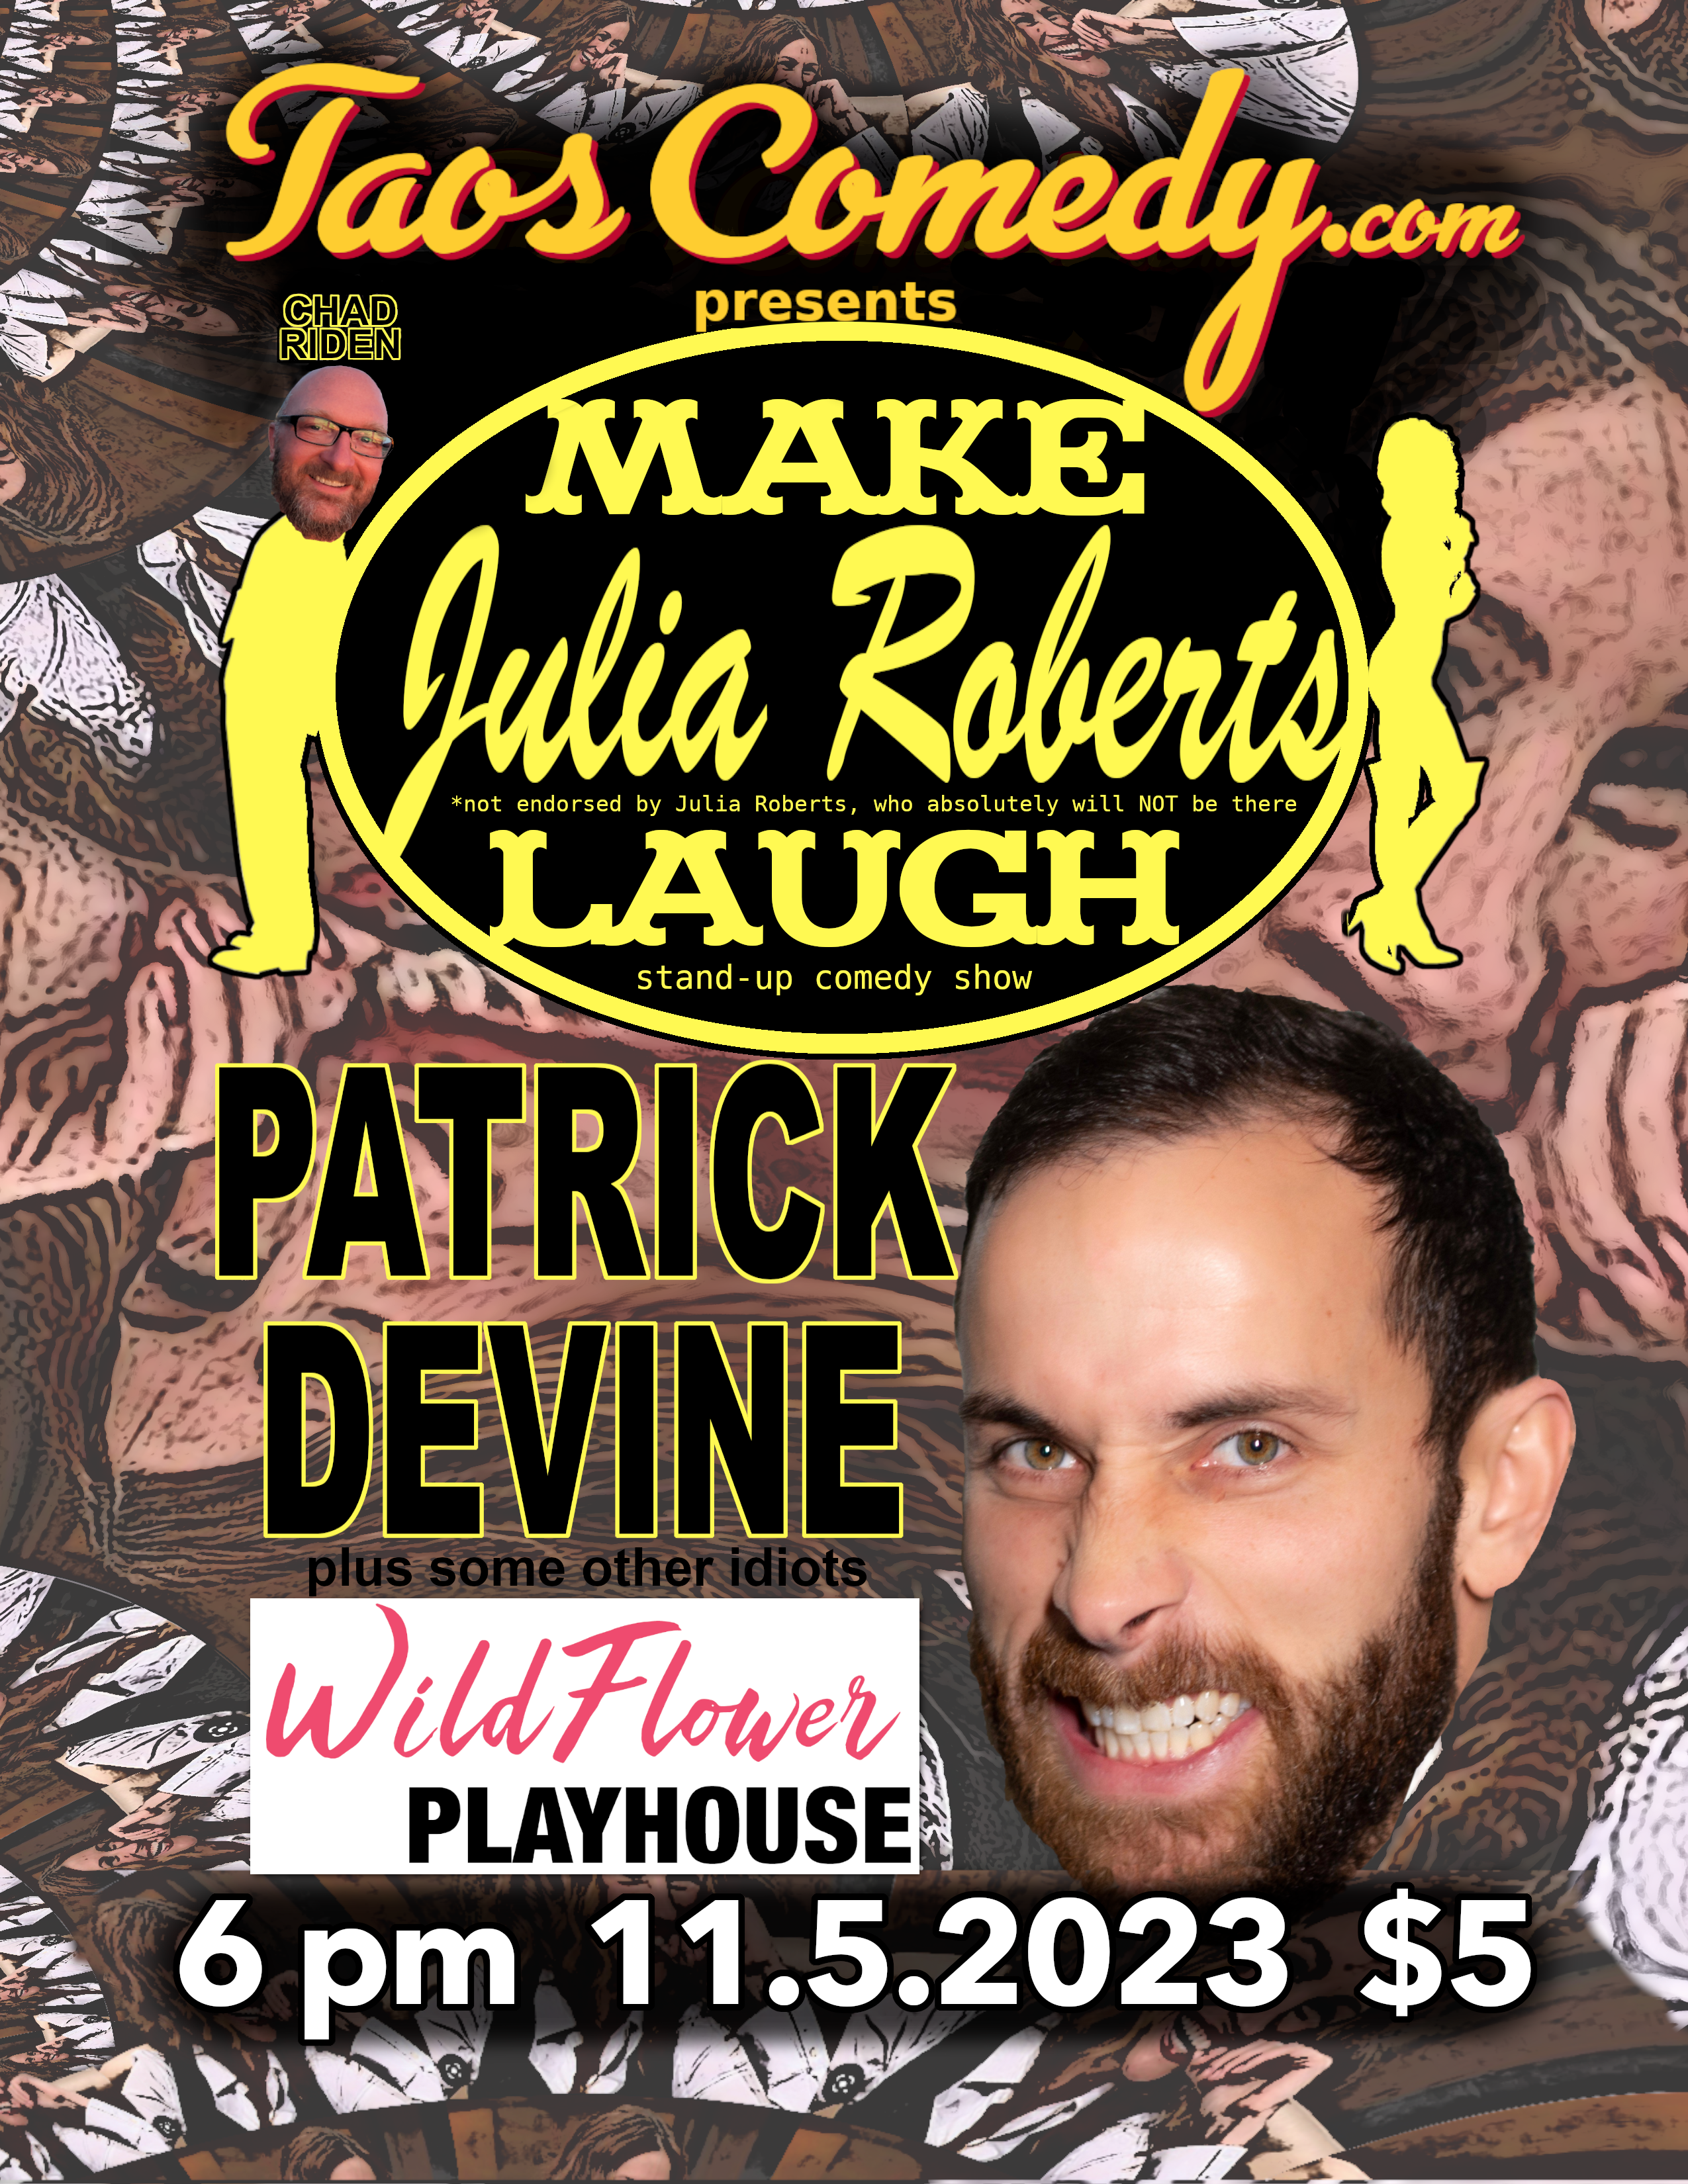 Patrick Devine, Make Julia Roberts Laugh! stand-up comedy show at Wildflower Playhouse